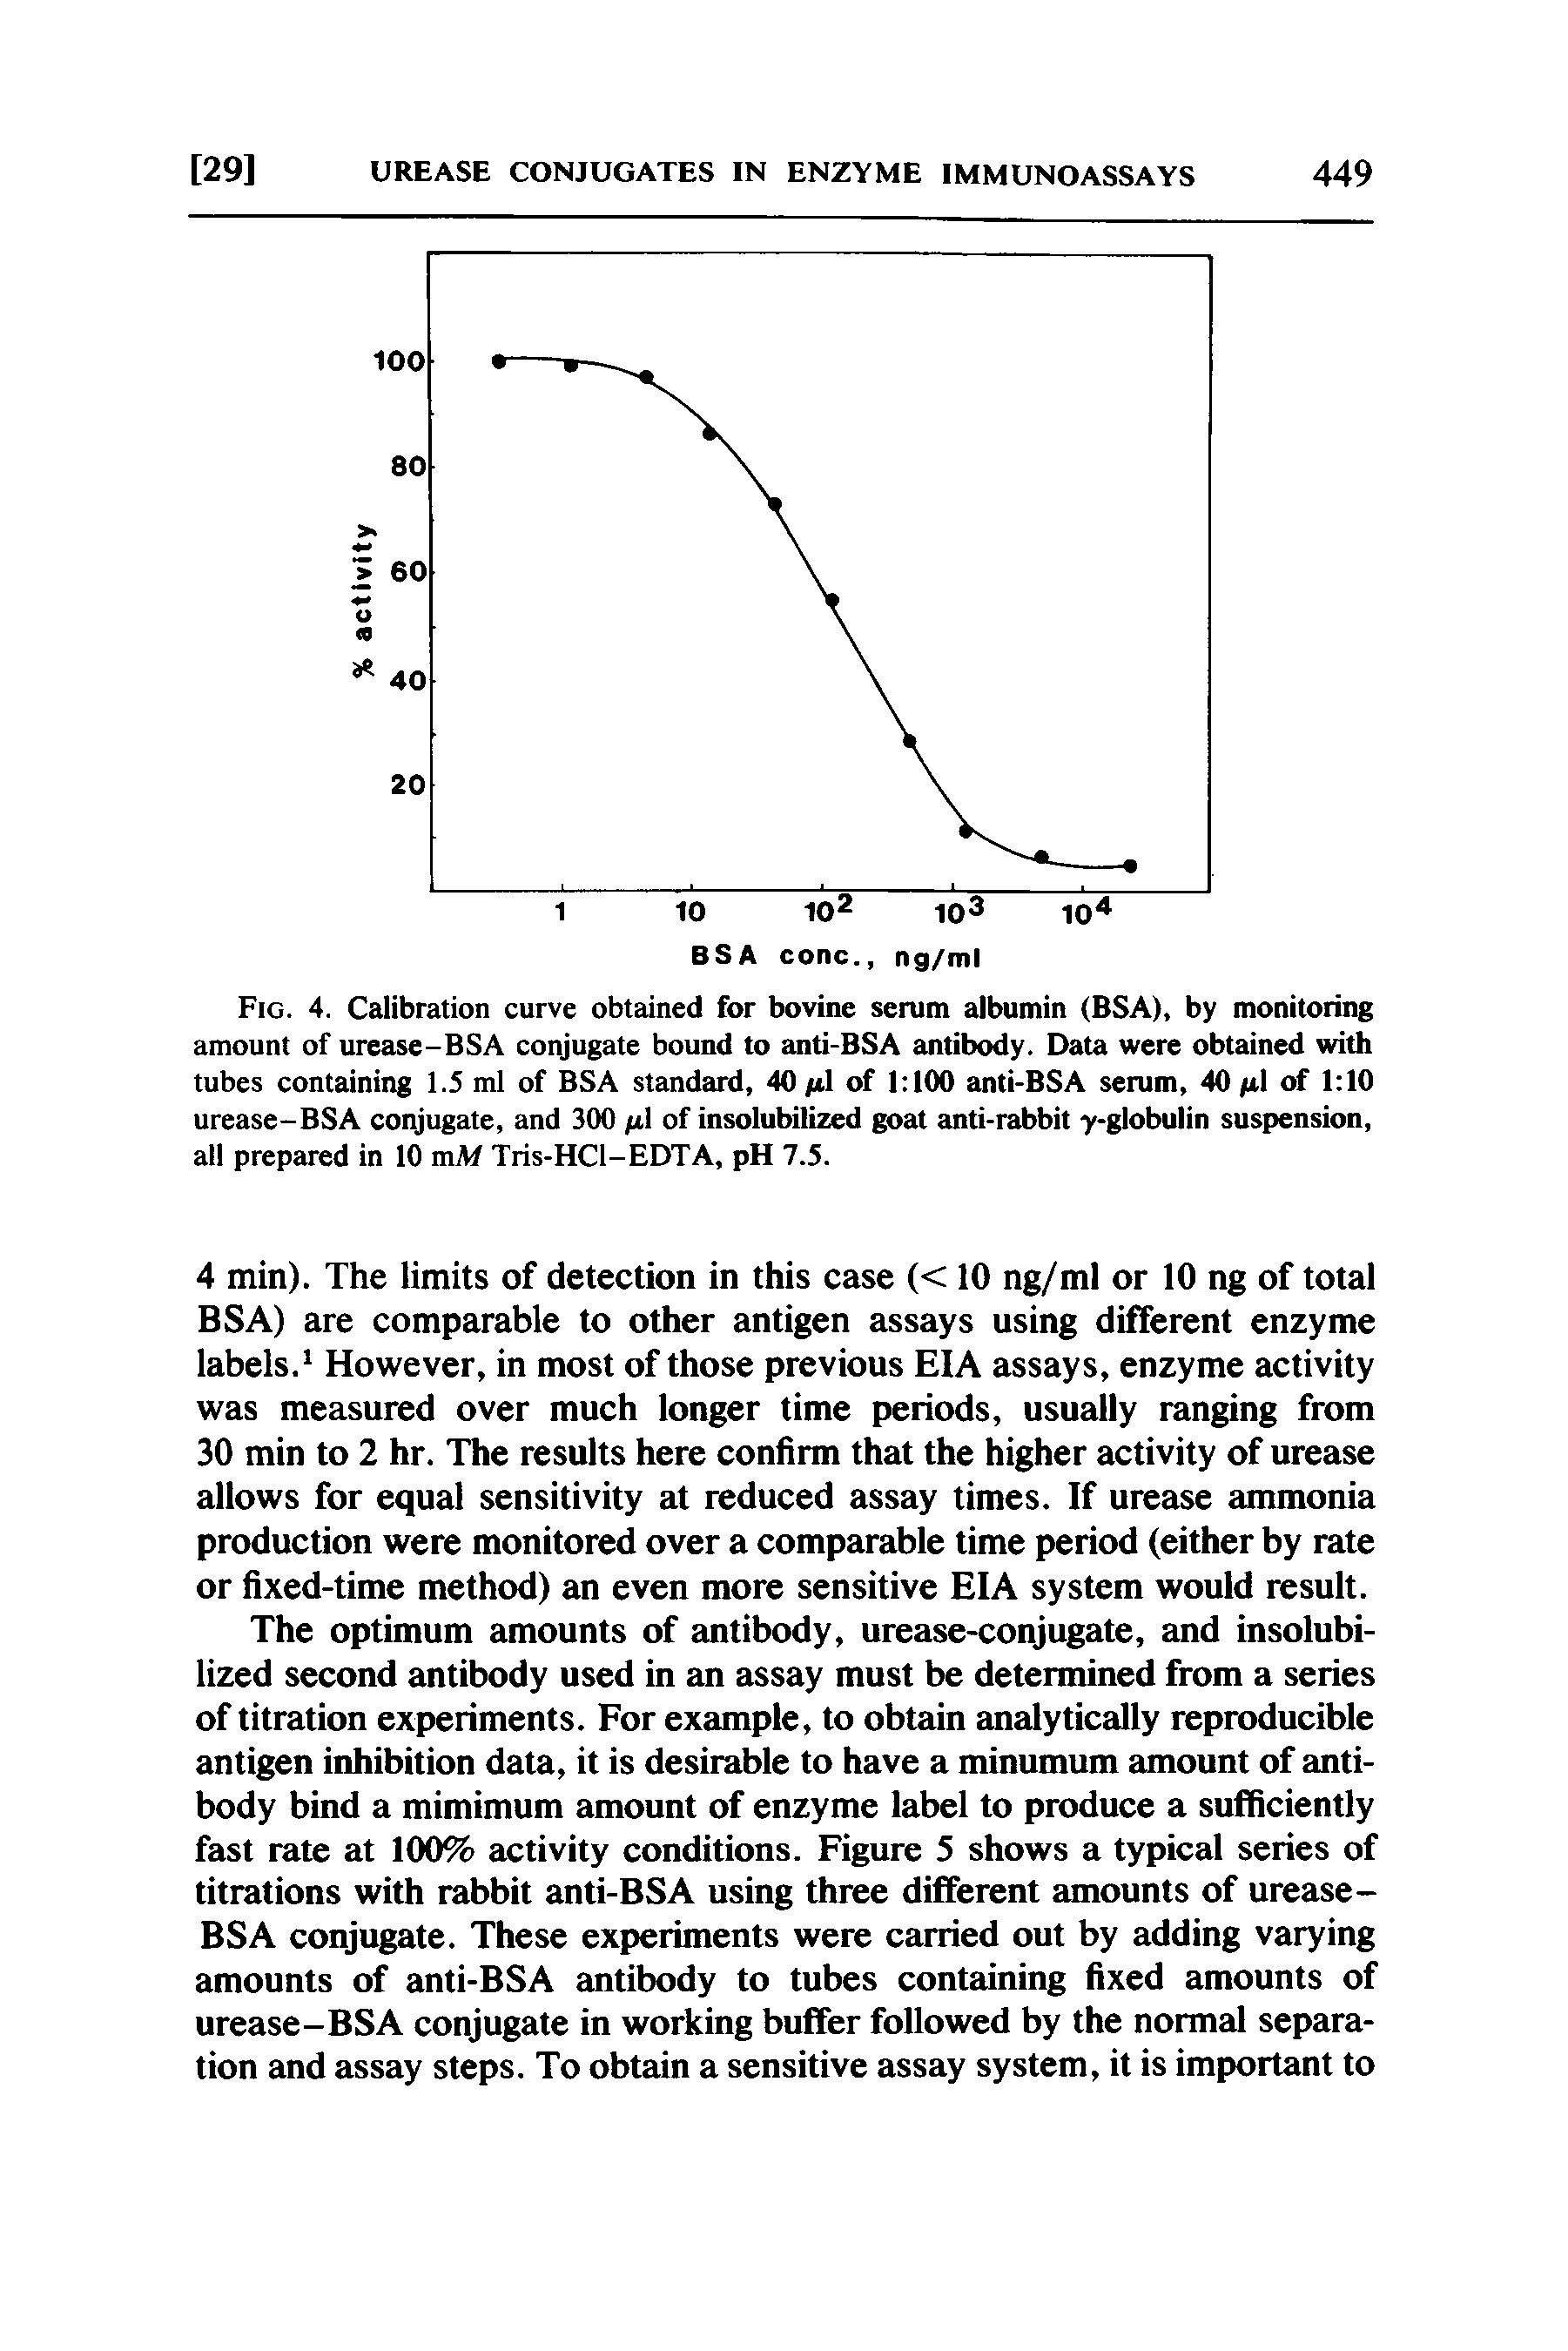 Fig. 4. Calibration curve obtained for bovine serum albumin (BSA), by monitoring amount of urease-BSA conjugate bound to anti-BSA antibody. Data were obtained with tubes containing 1.5 ml of BSA standard, 40 fil of 1 100 anti-BSA serum, 40 /al of 1 10 urease-BSA conjugate, and 300 1 of insolubilized goat anti-rabbit y-globulin suspension, all prepared in 10 mAf Tris-HCl-EDTA, pH 7.5.